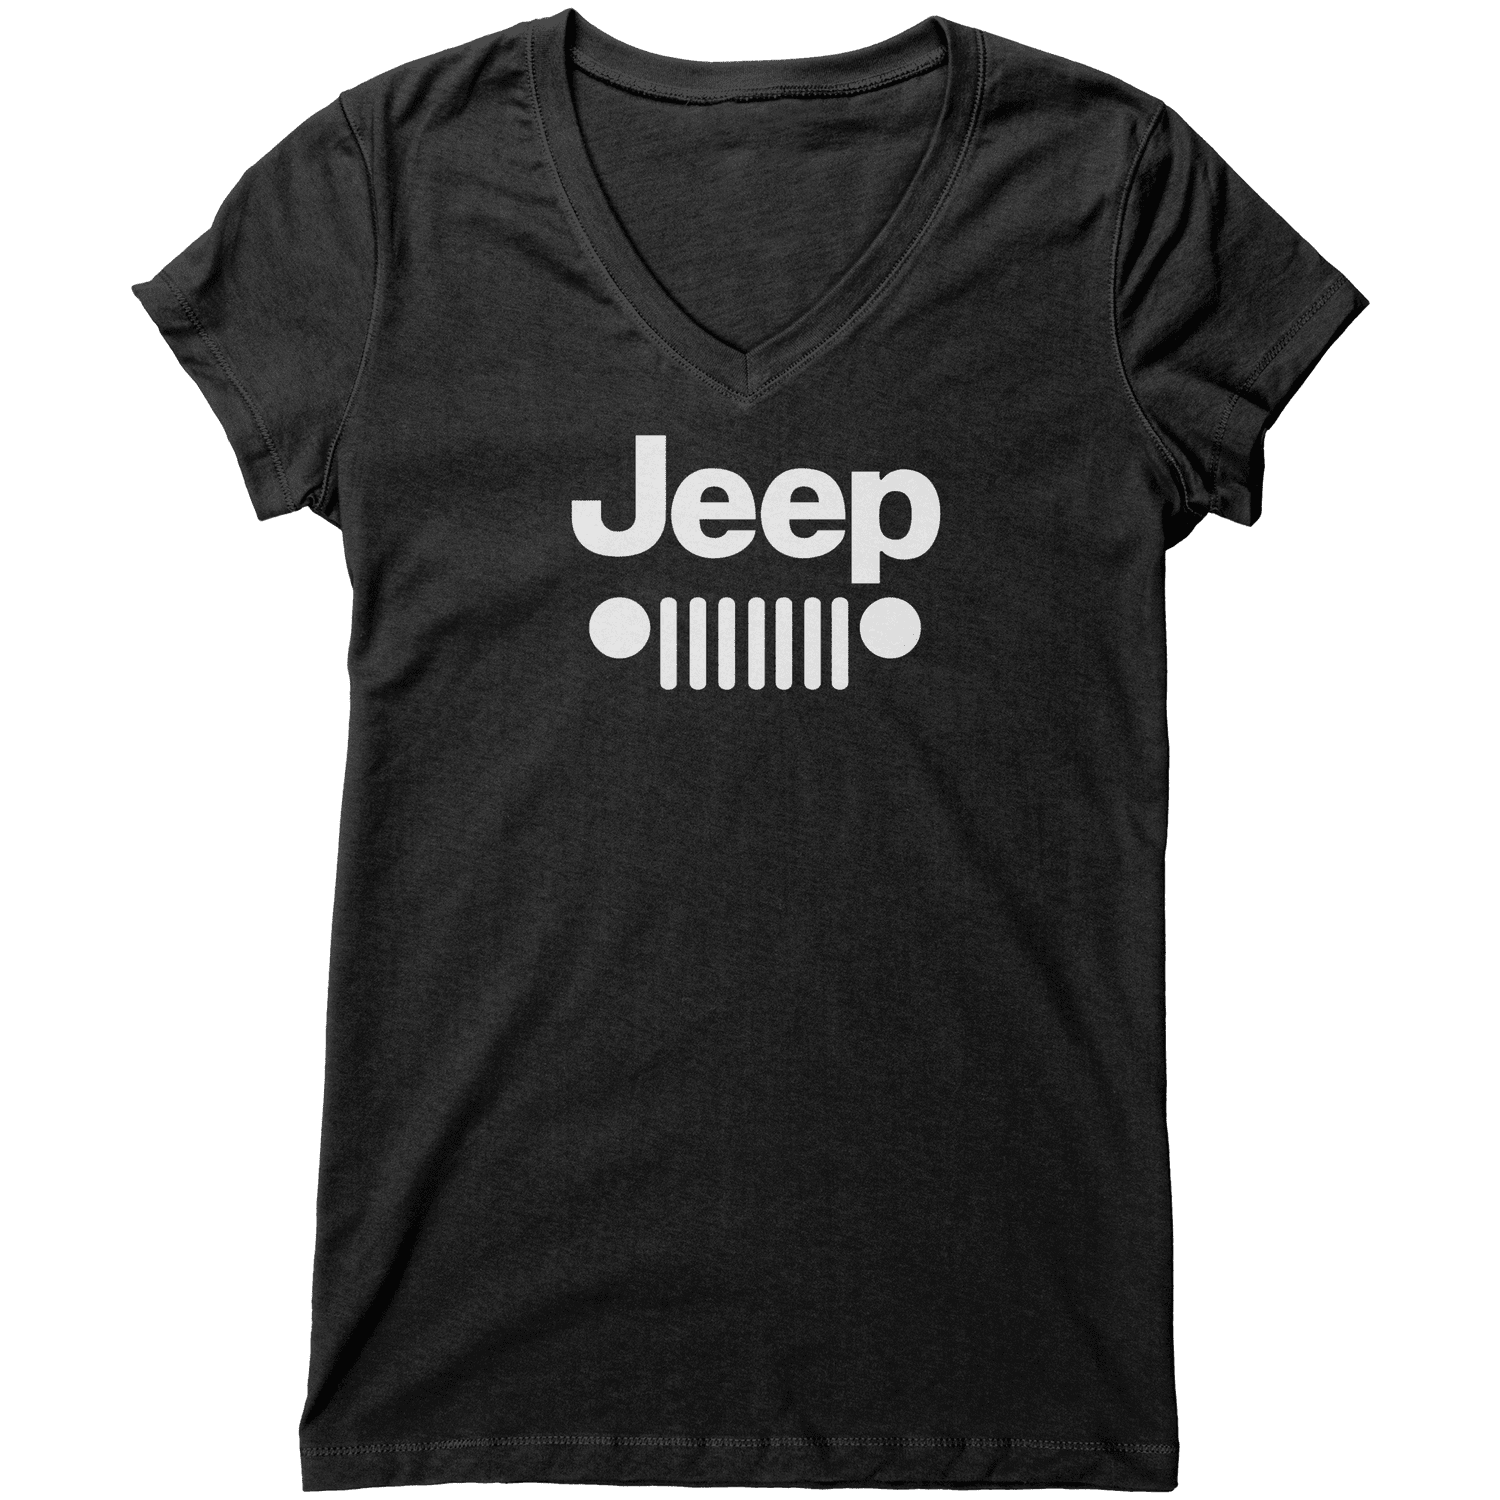 Reflective Offroad Grill Tee Shirt Crew Neck, V Neck, Tank Top